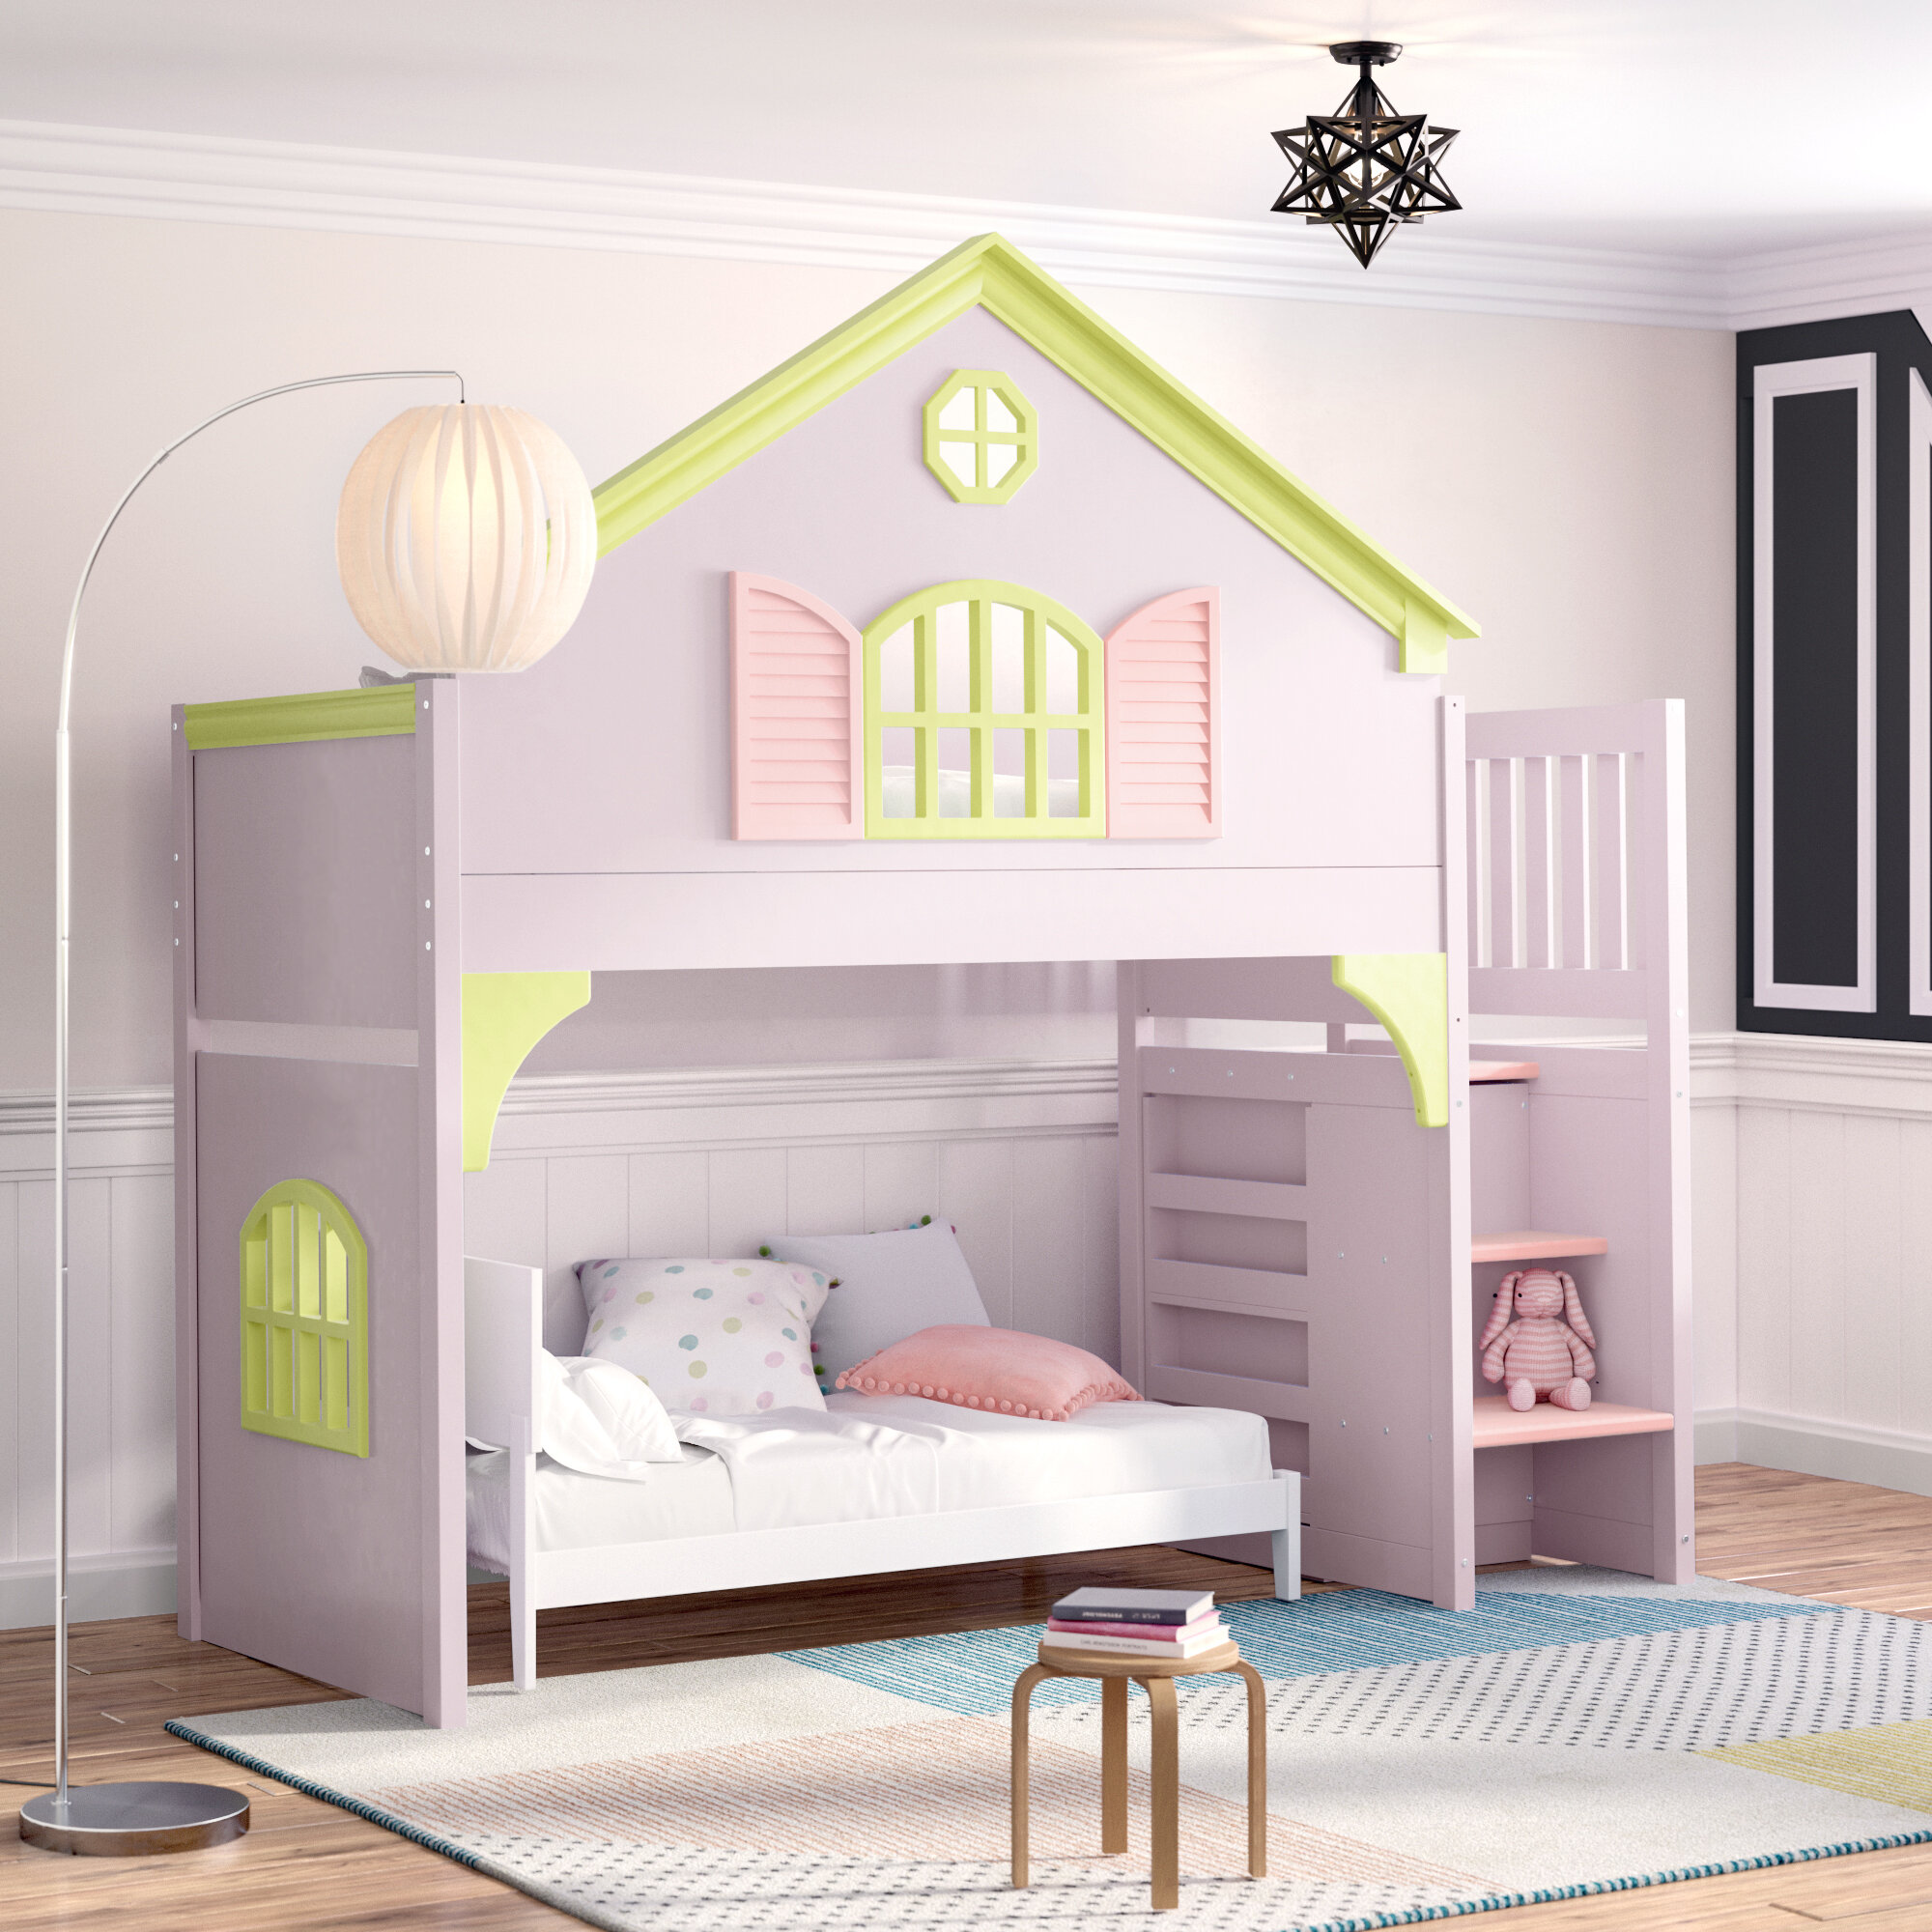 bunk bed with play area